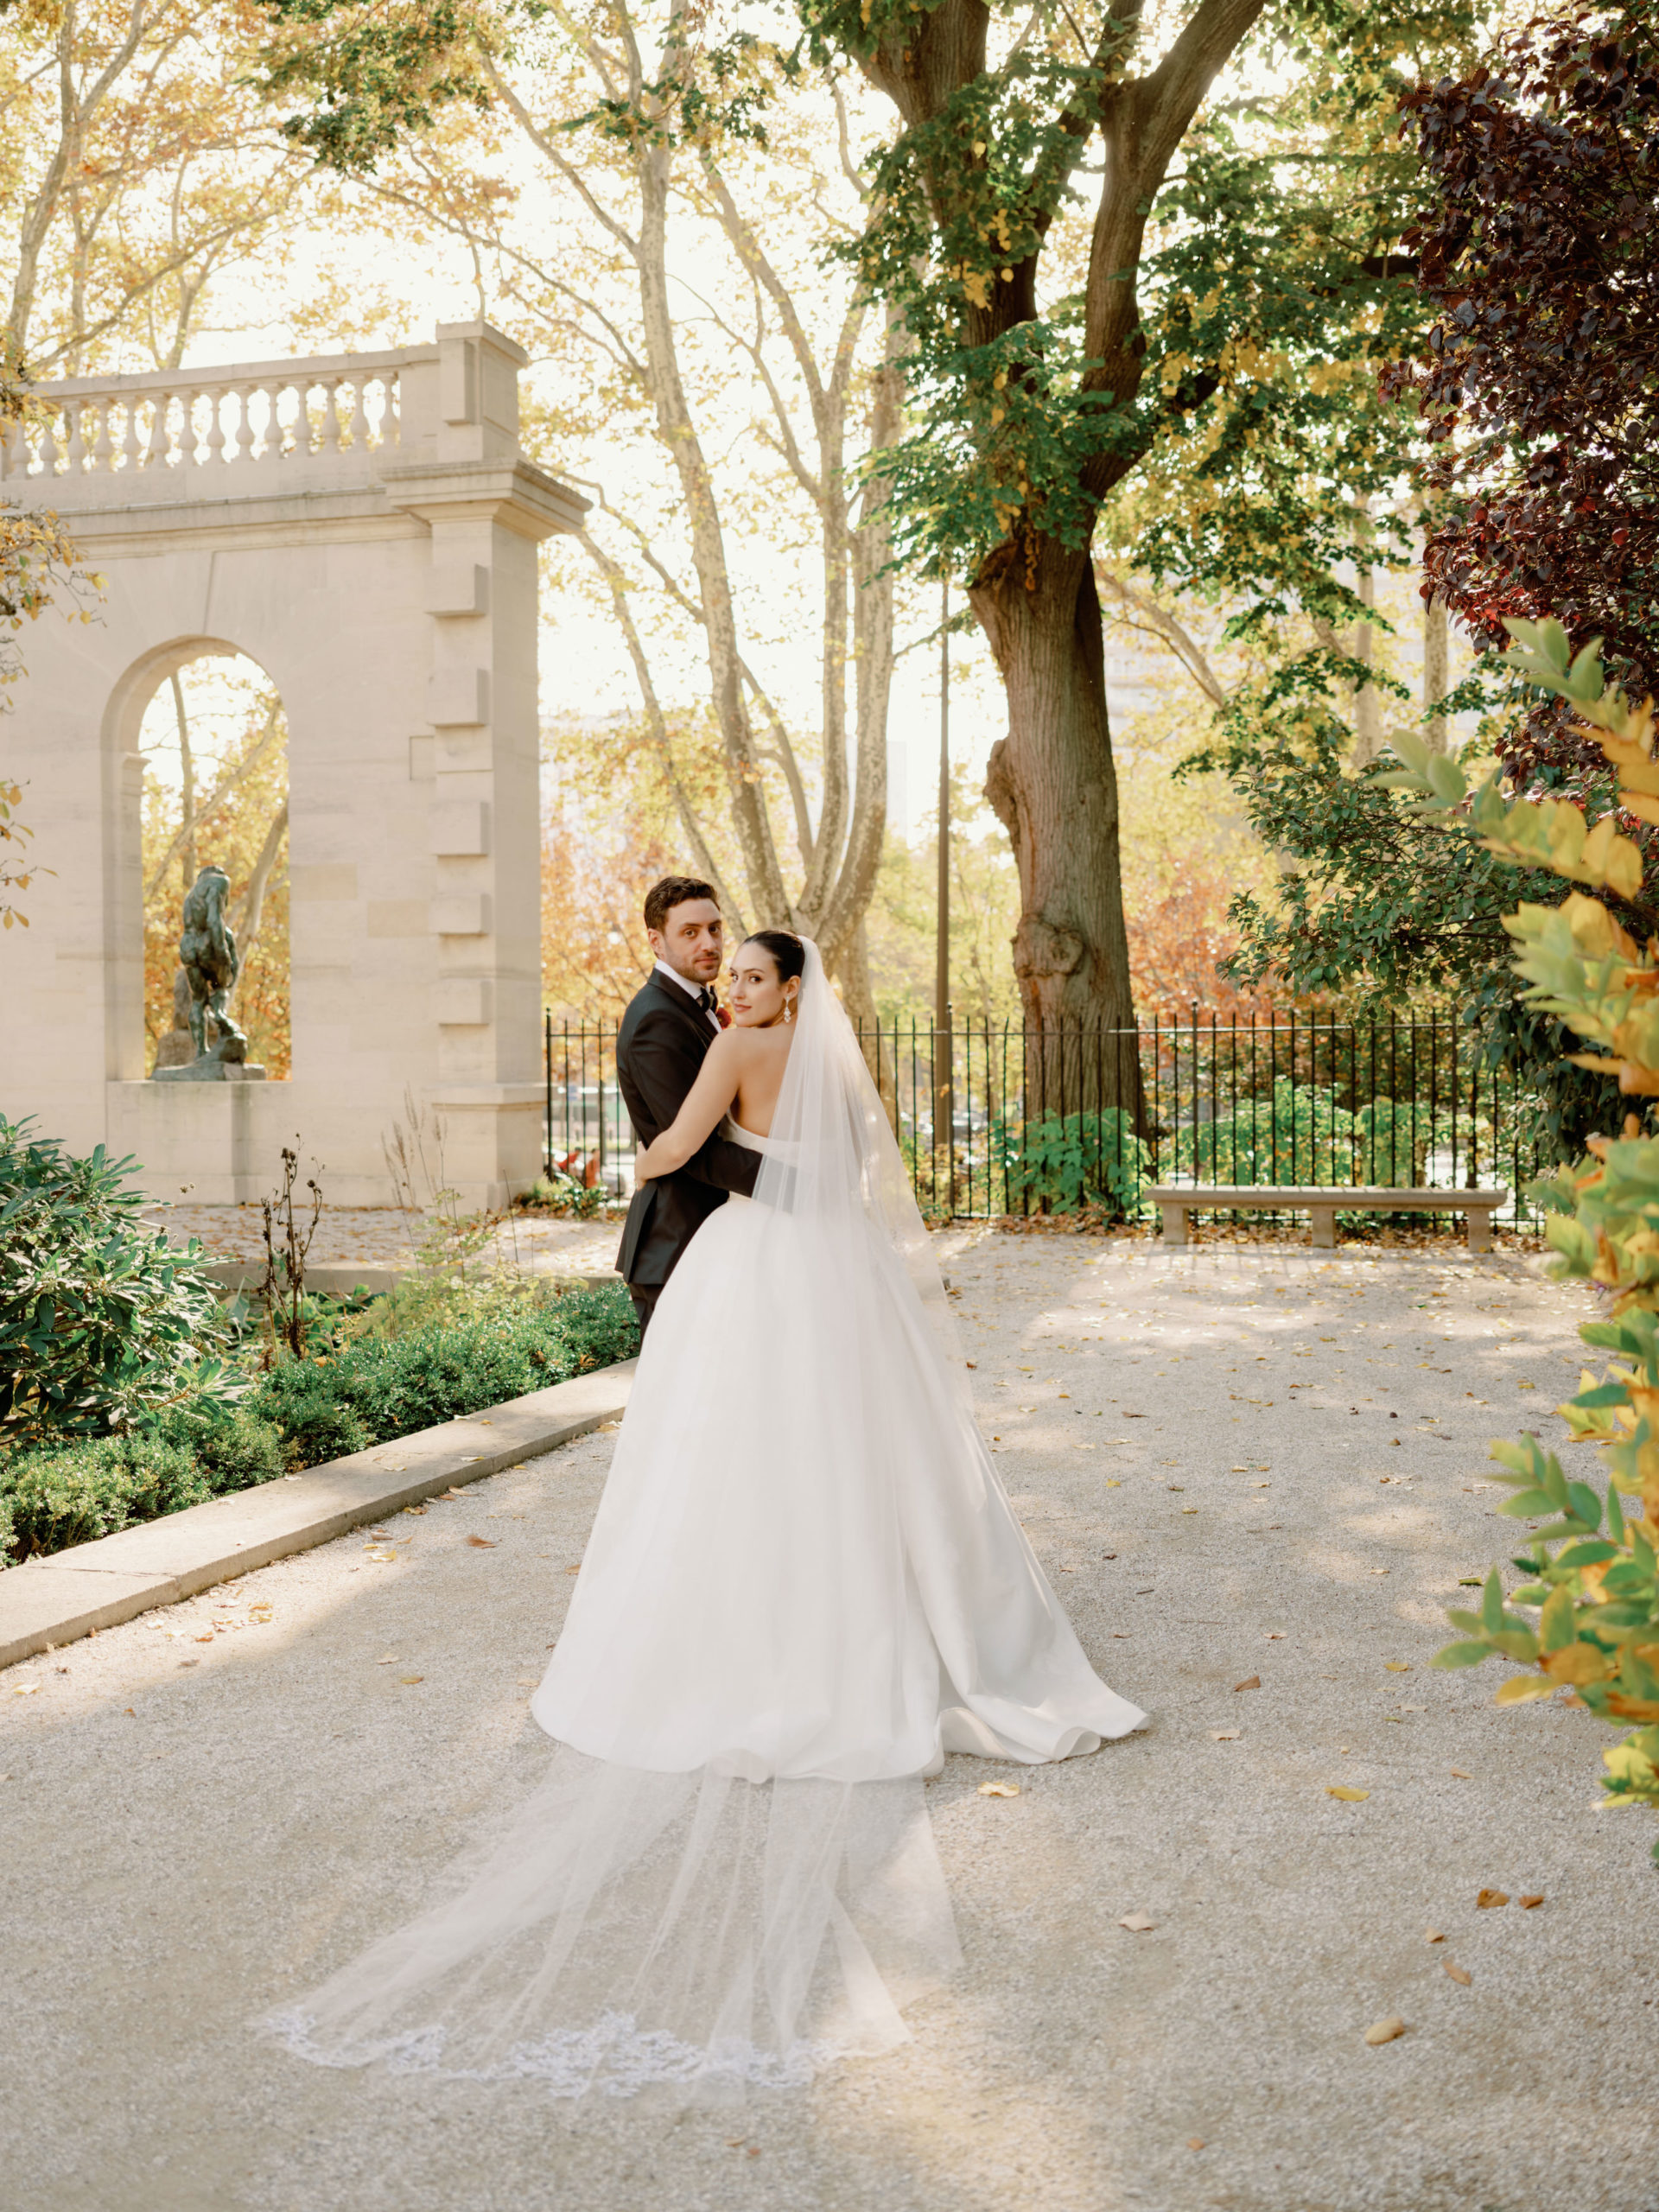 Editorial image of the bride and groom in a beautiful garden. Image by Jenny Fu Studio